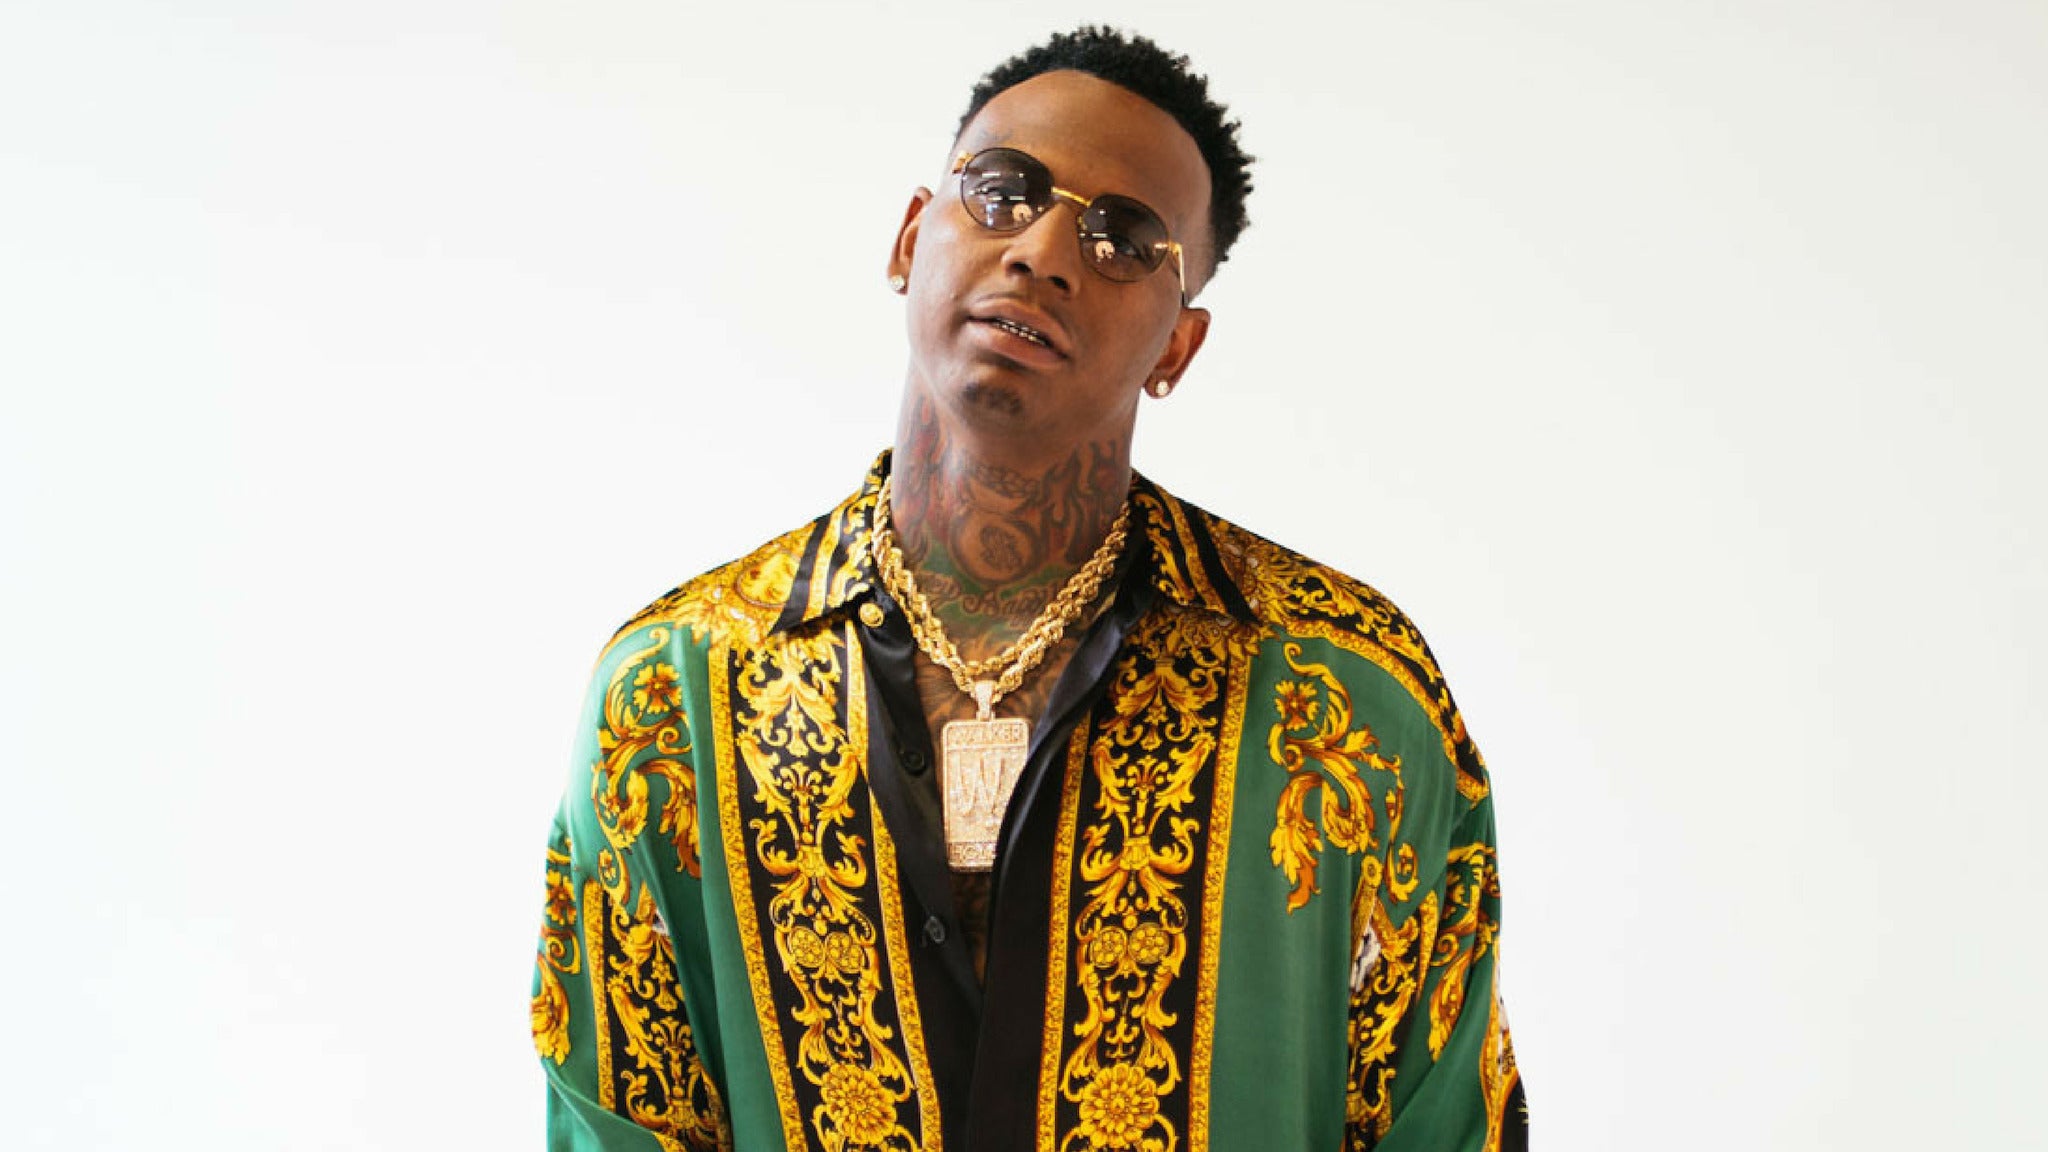 Moneybagg Yo - Word 4 Word Tour in Minneapolis promo photo for Live Nation presale offer code